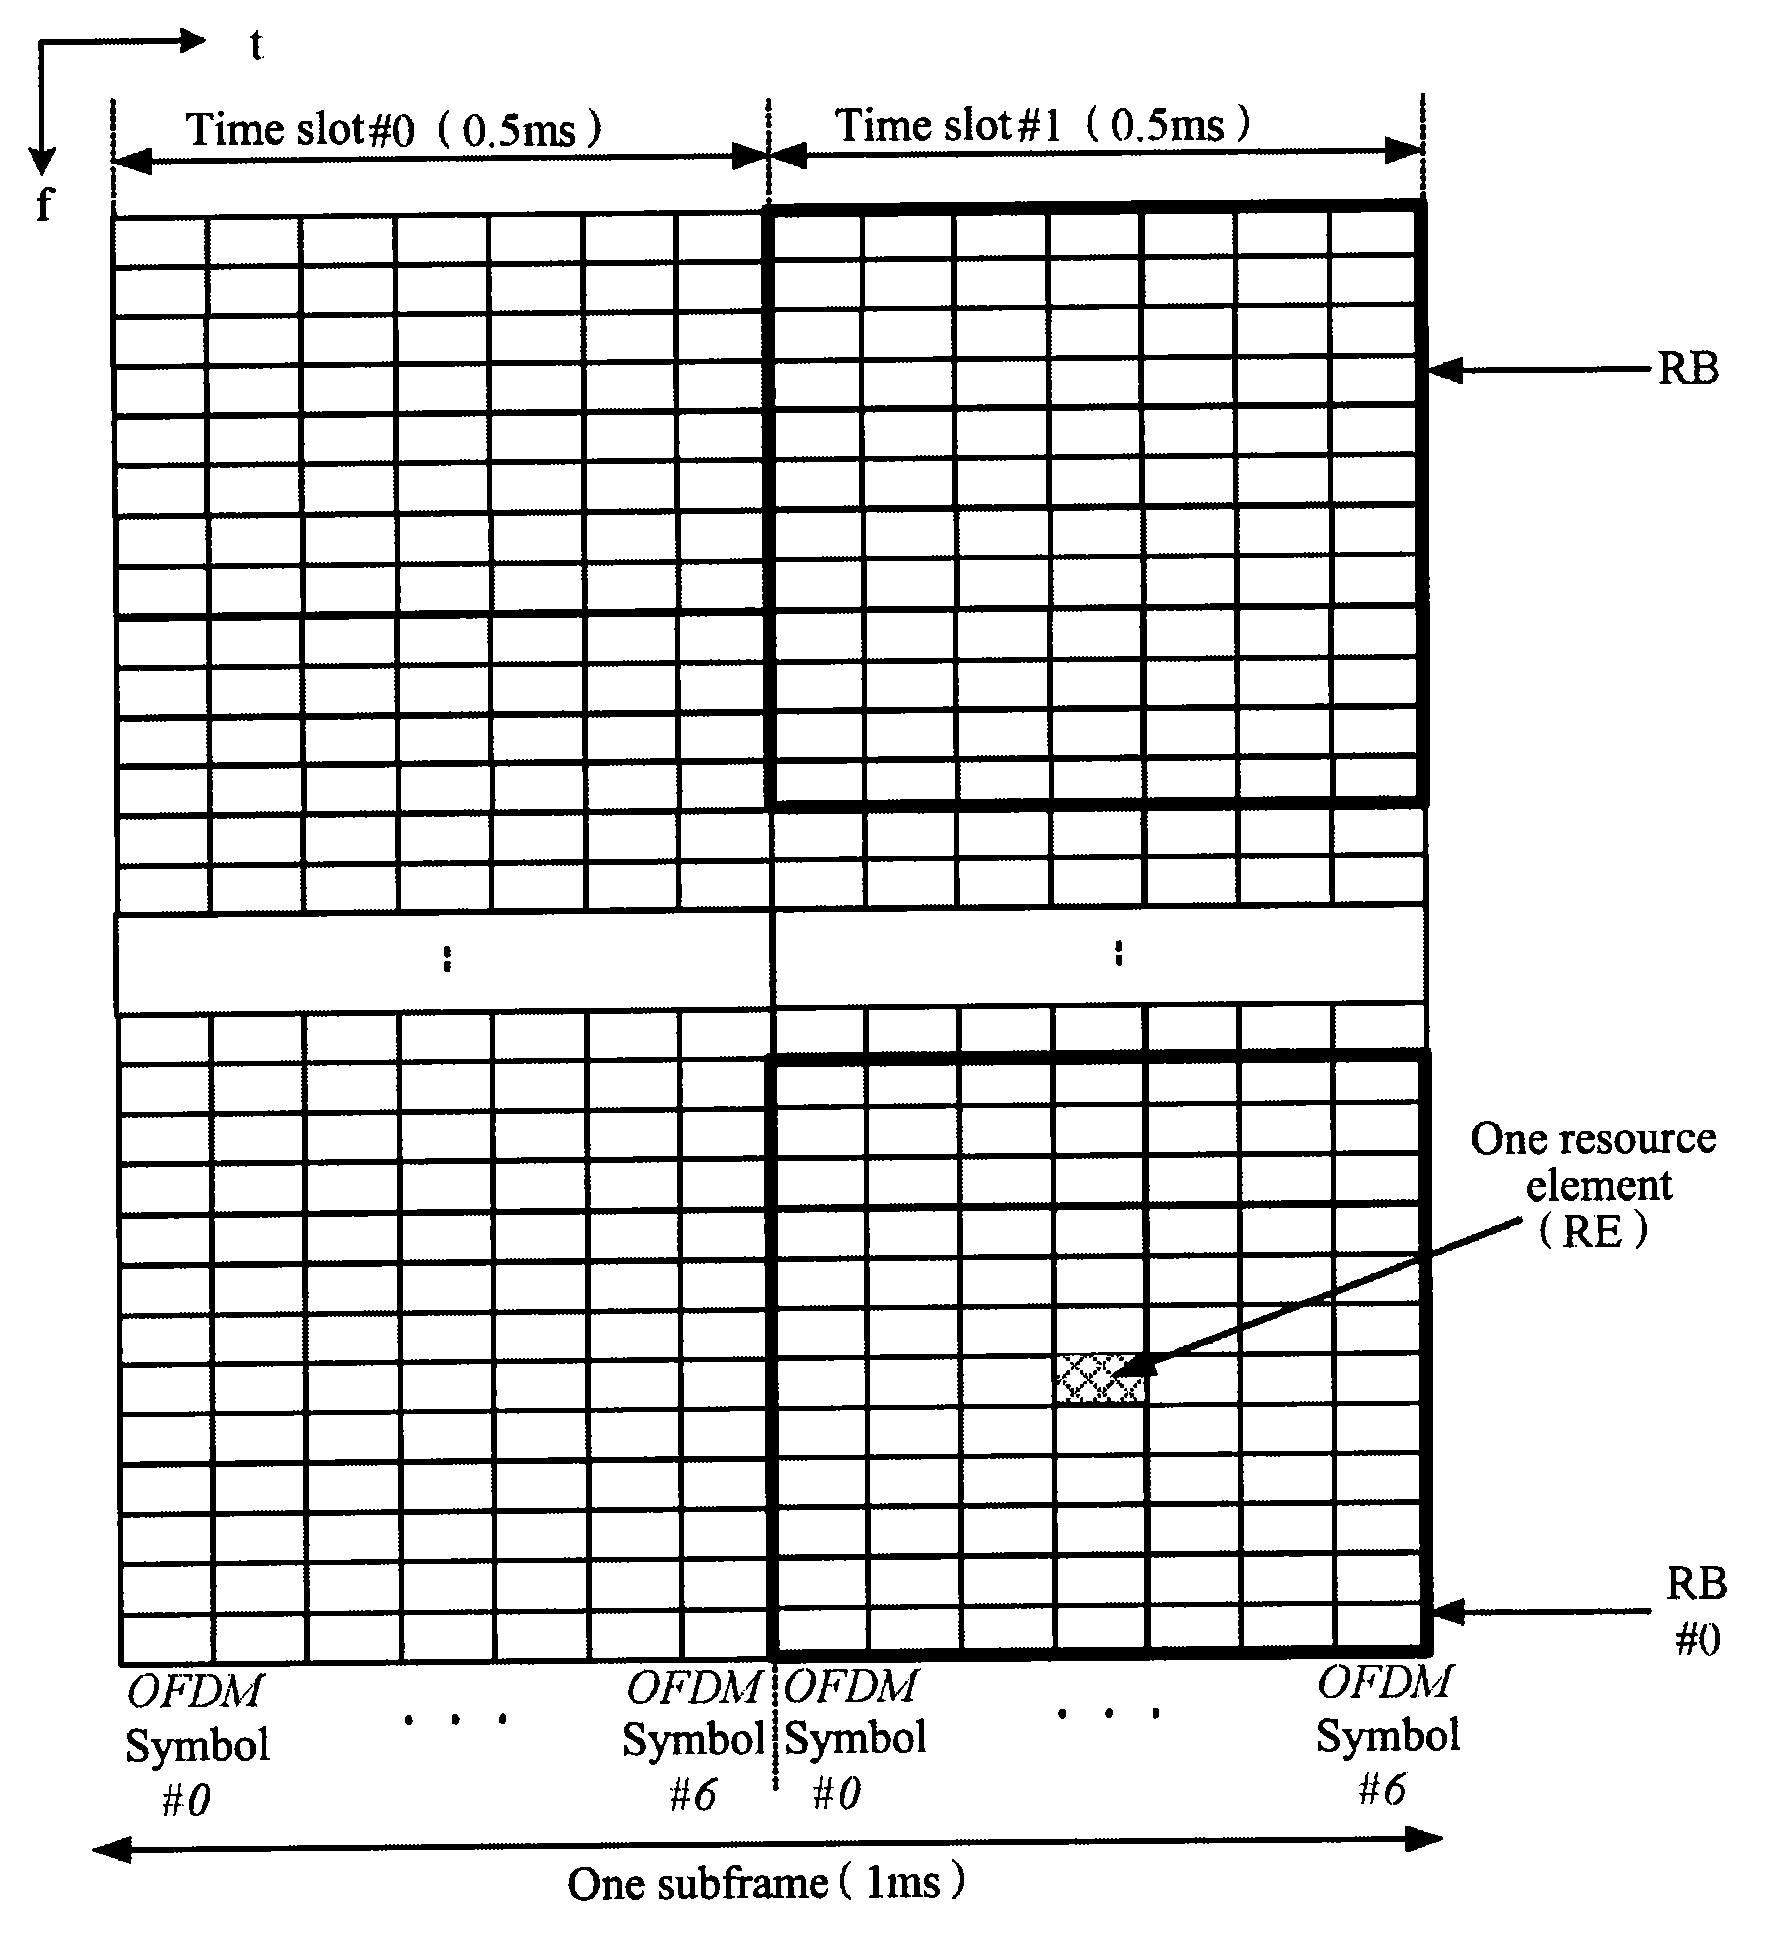 Method and Device for Distributing and Scheduling Wireless Resources in Orthogonal Frequency Division Multiplexing System